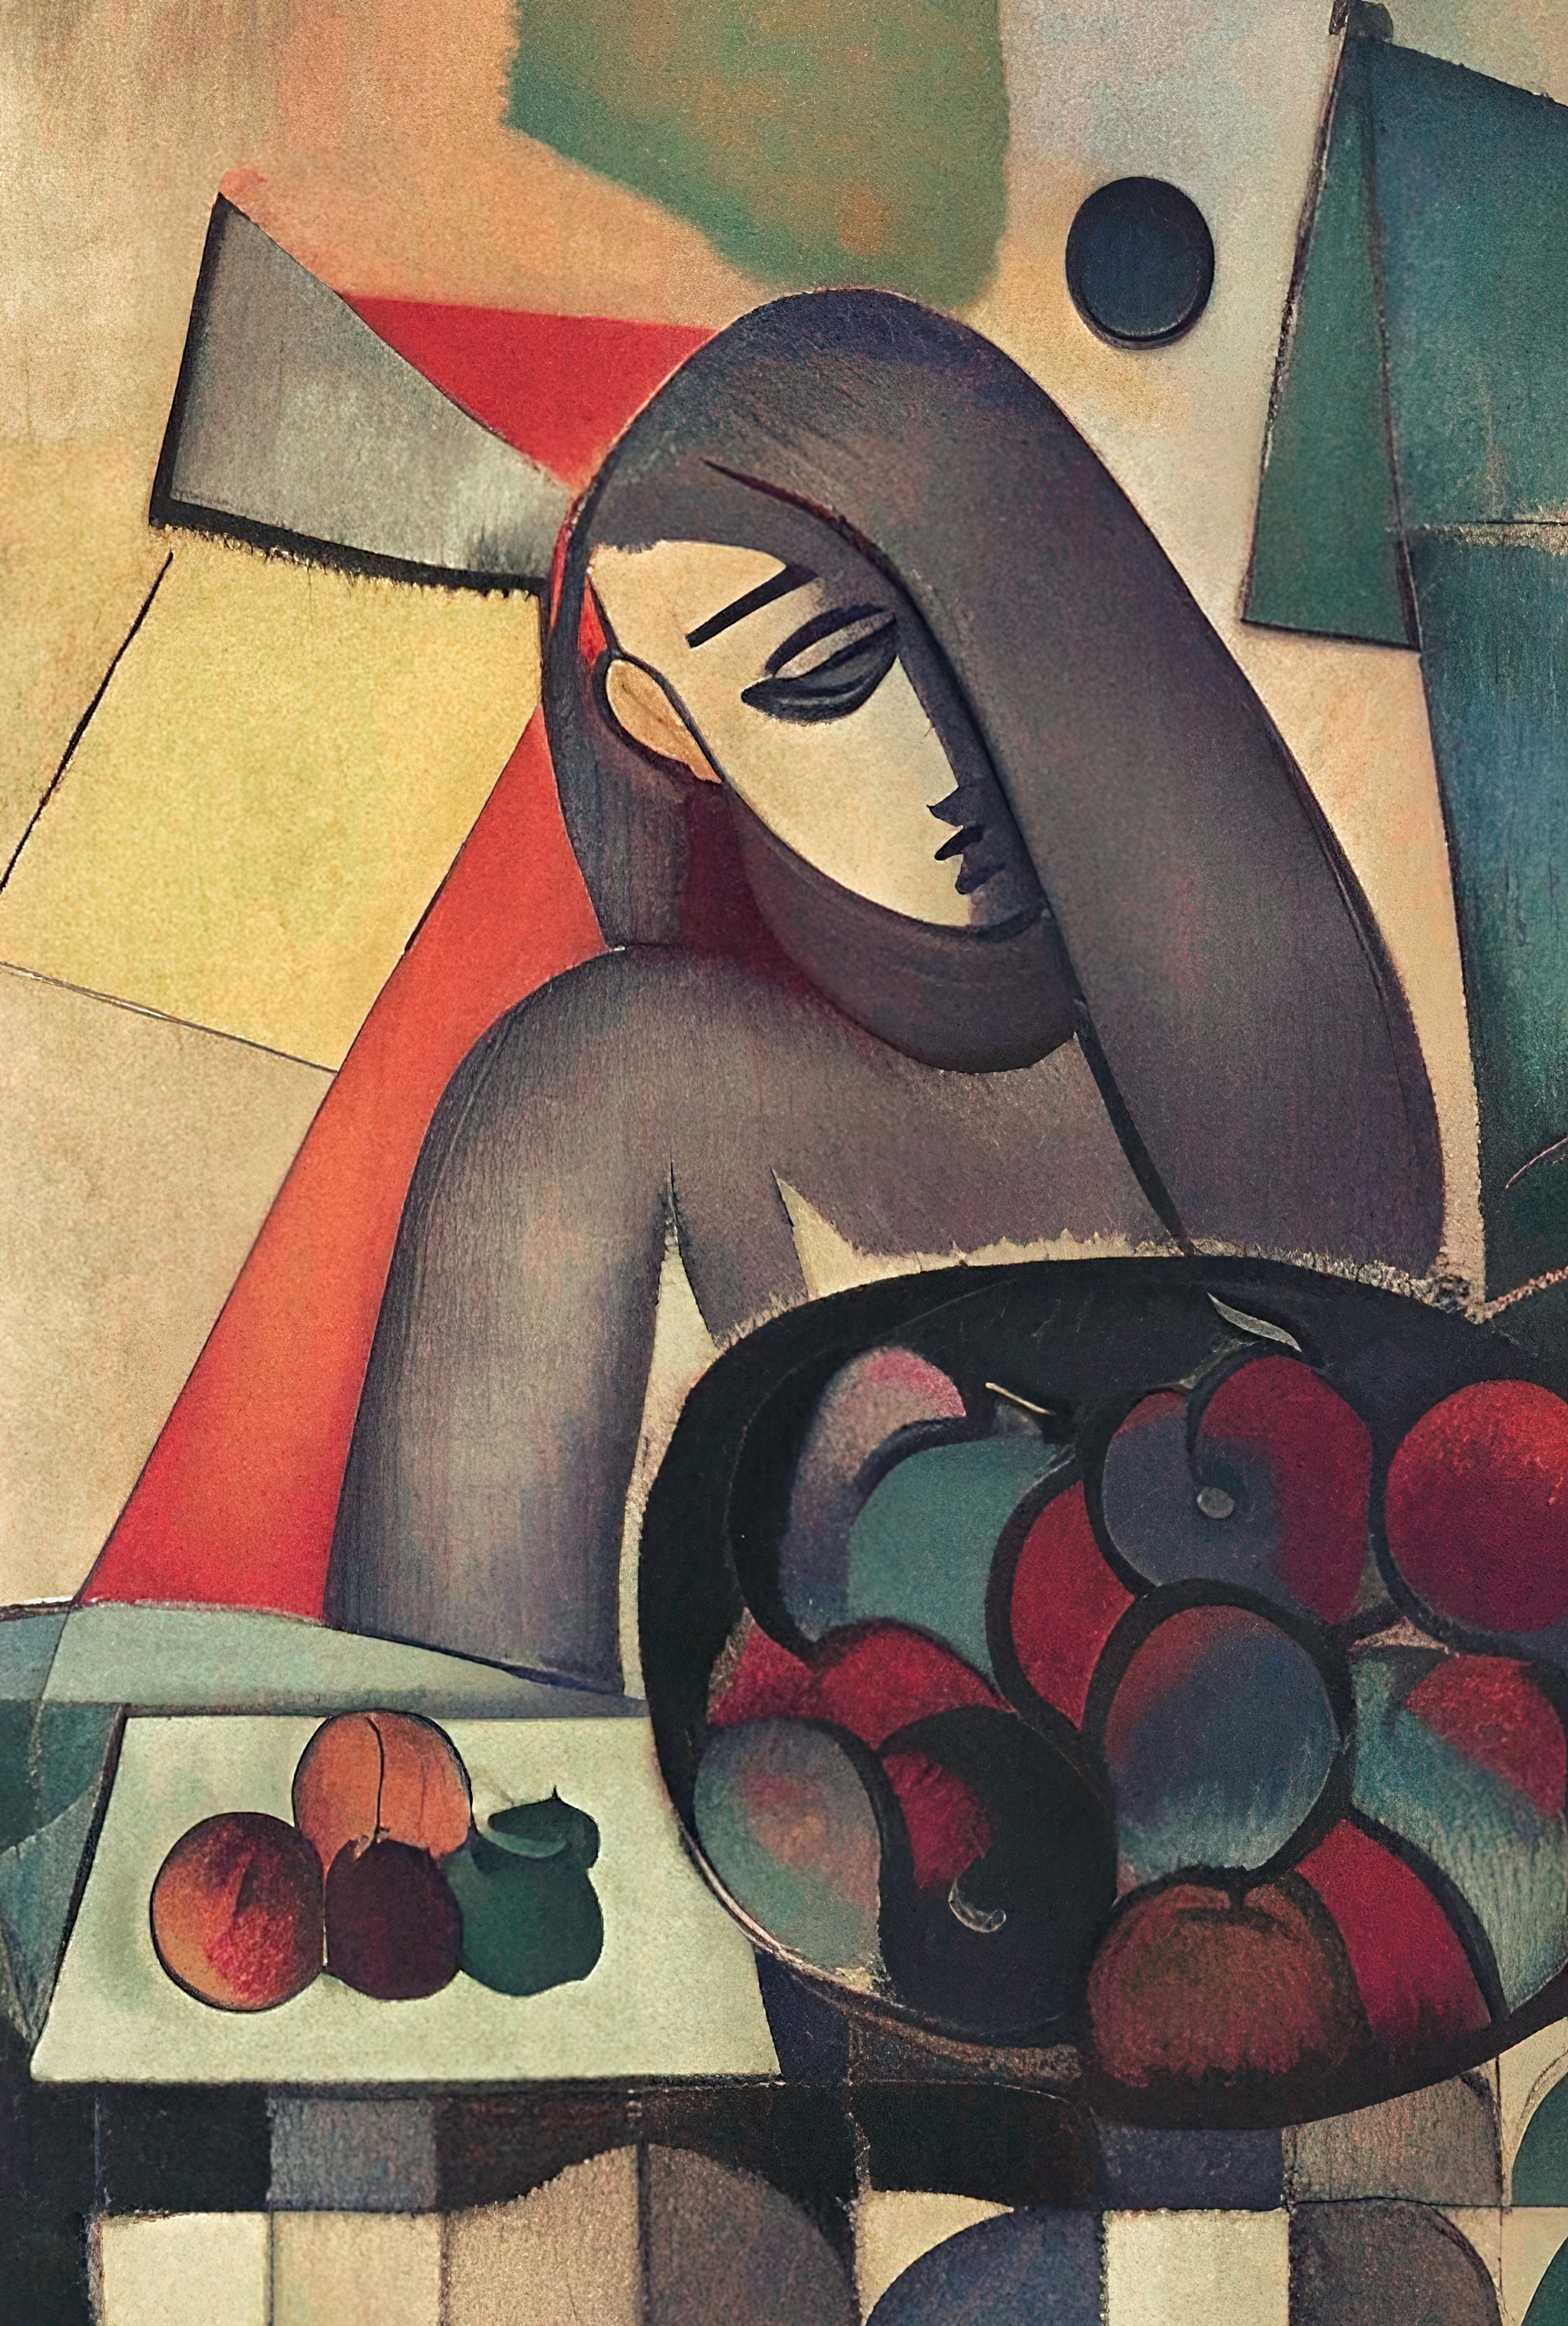 'Young Girl Selling Fruits' |Paolo Galleri|